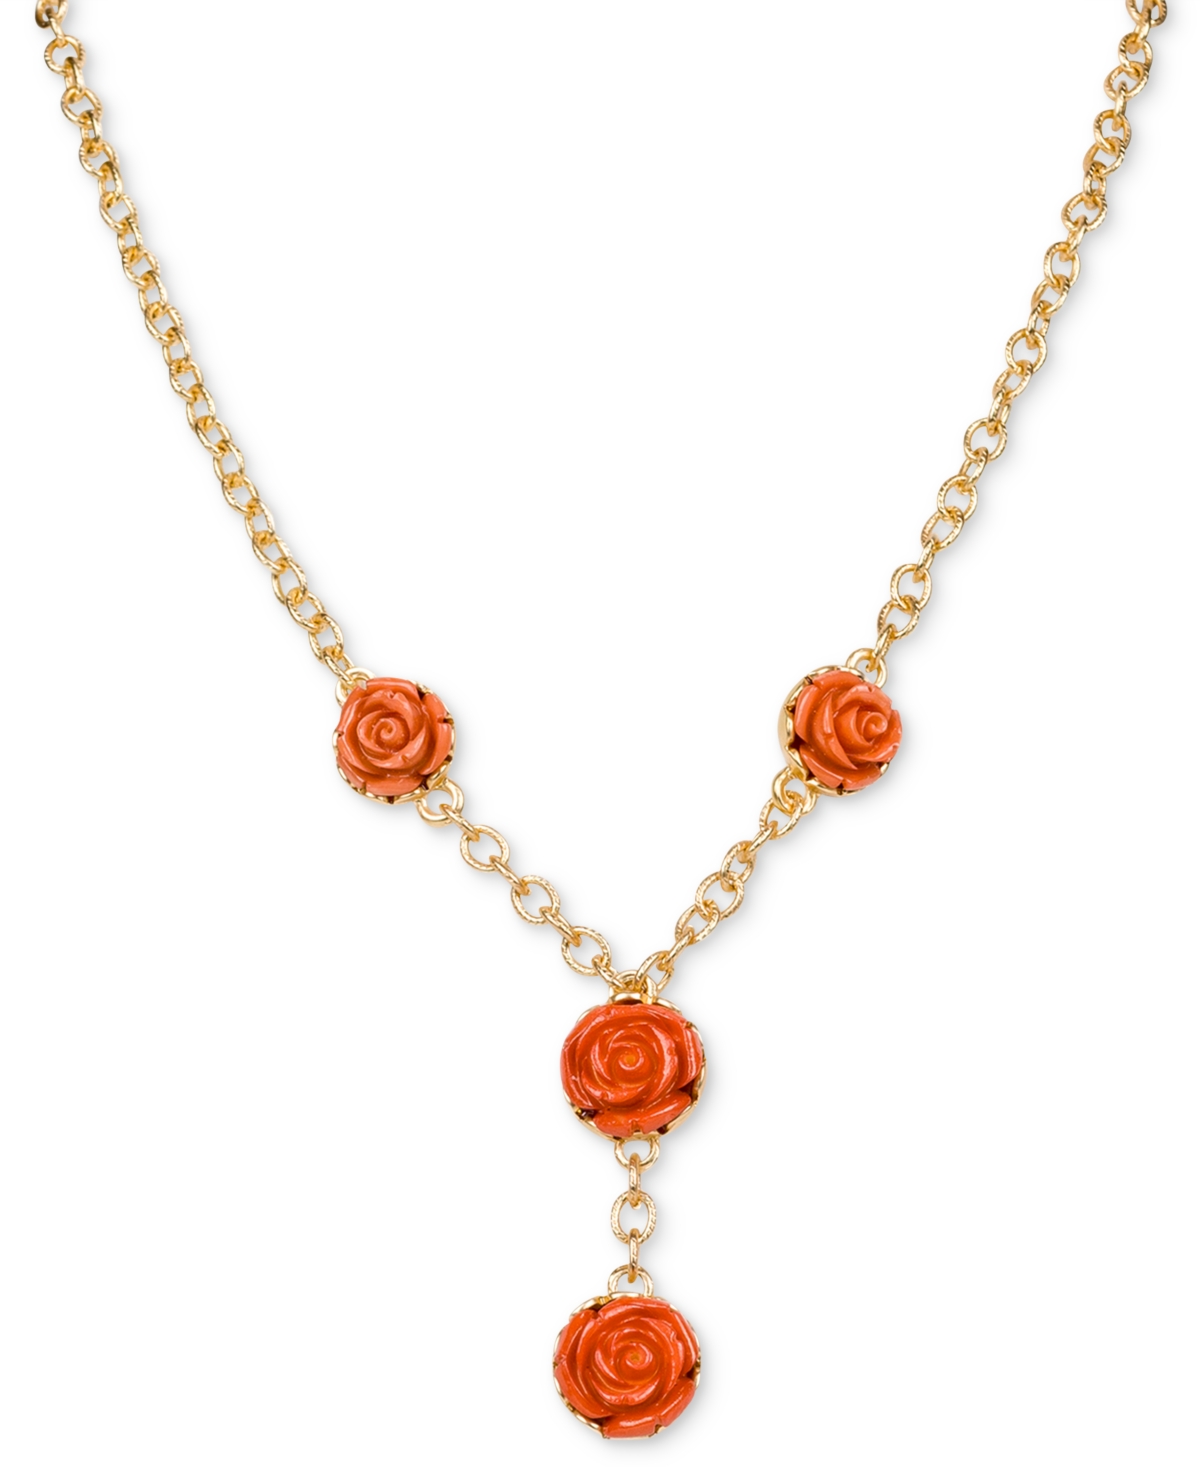 Gold-Tone Carved Rose Lariat Necklace, 18" + 3" extender - Egyptian Gold, Pink